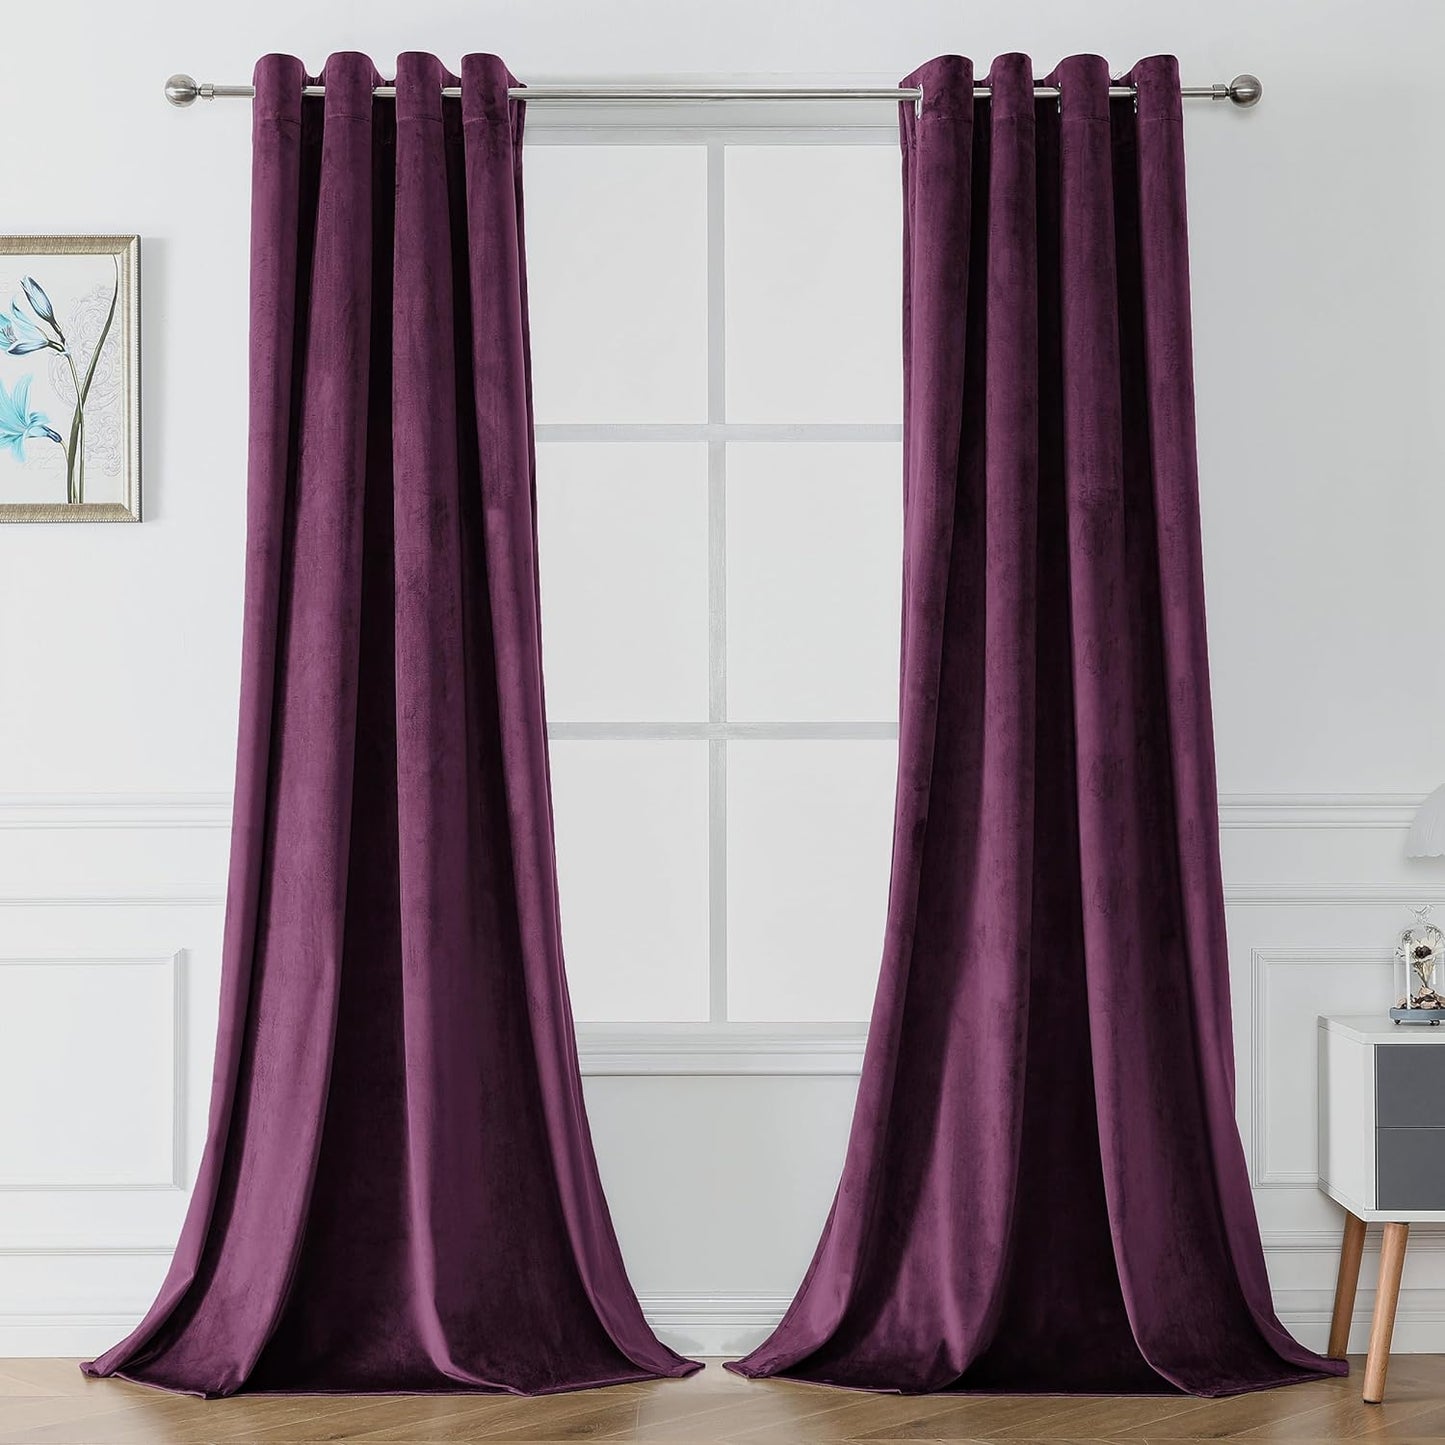 Victree Velvet Curtains for Bedroom, Blackout Curtains 52 X 84 Inch Length - Room Darkening Sun Light Blocking Grommet Window Drapes for Living Room, 2 Panels, Navy  Victree Purple 52 X 108 Inches 